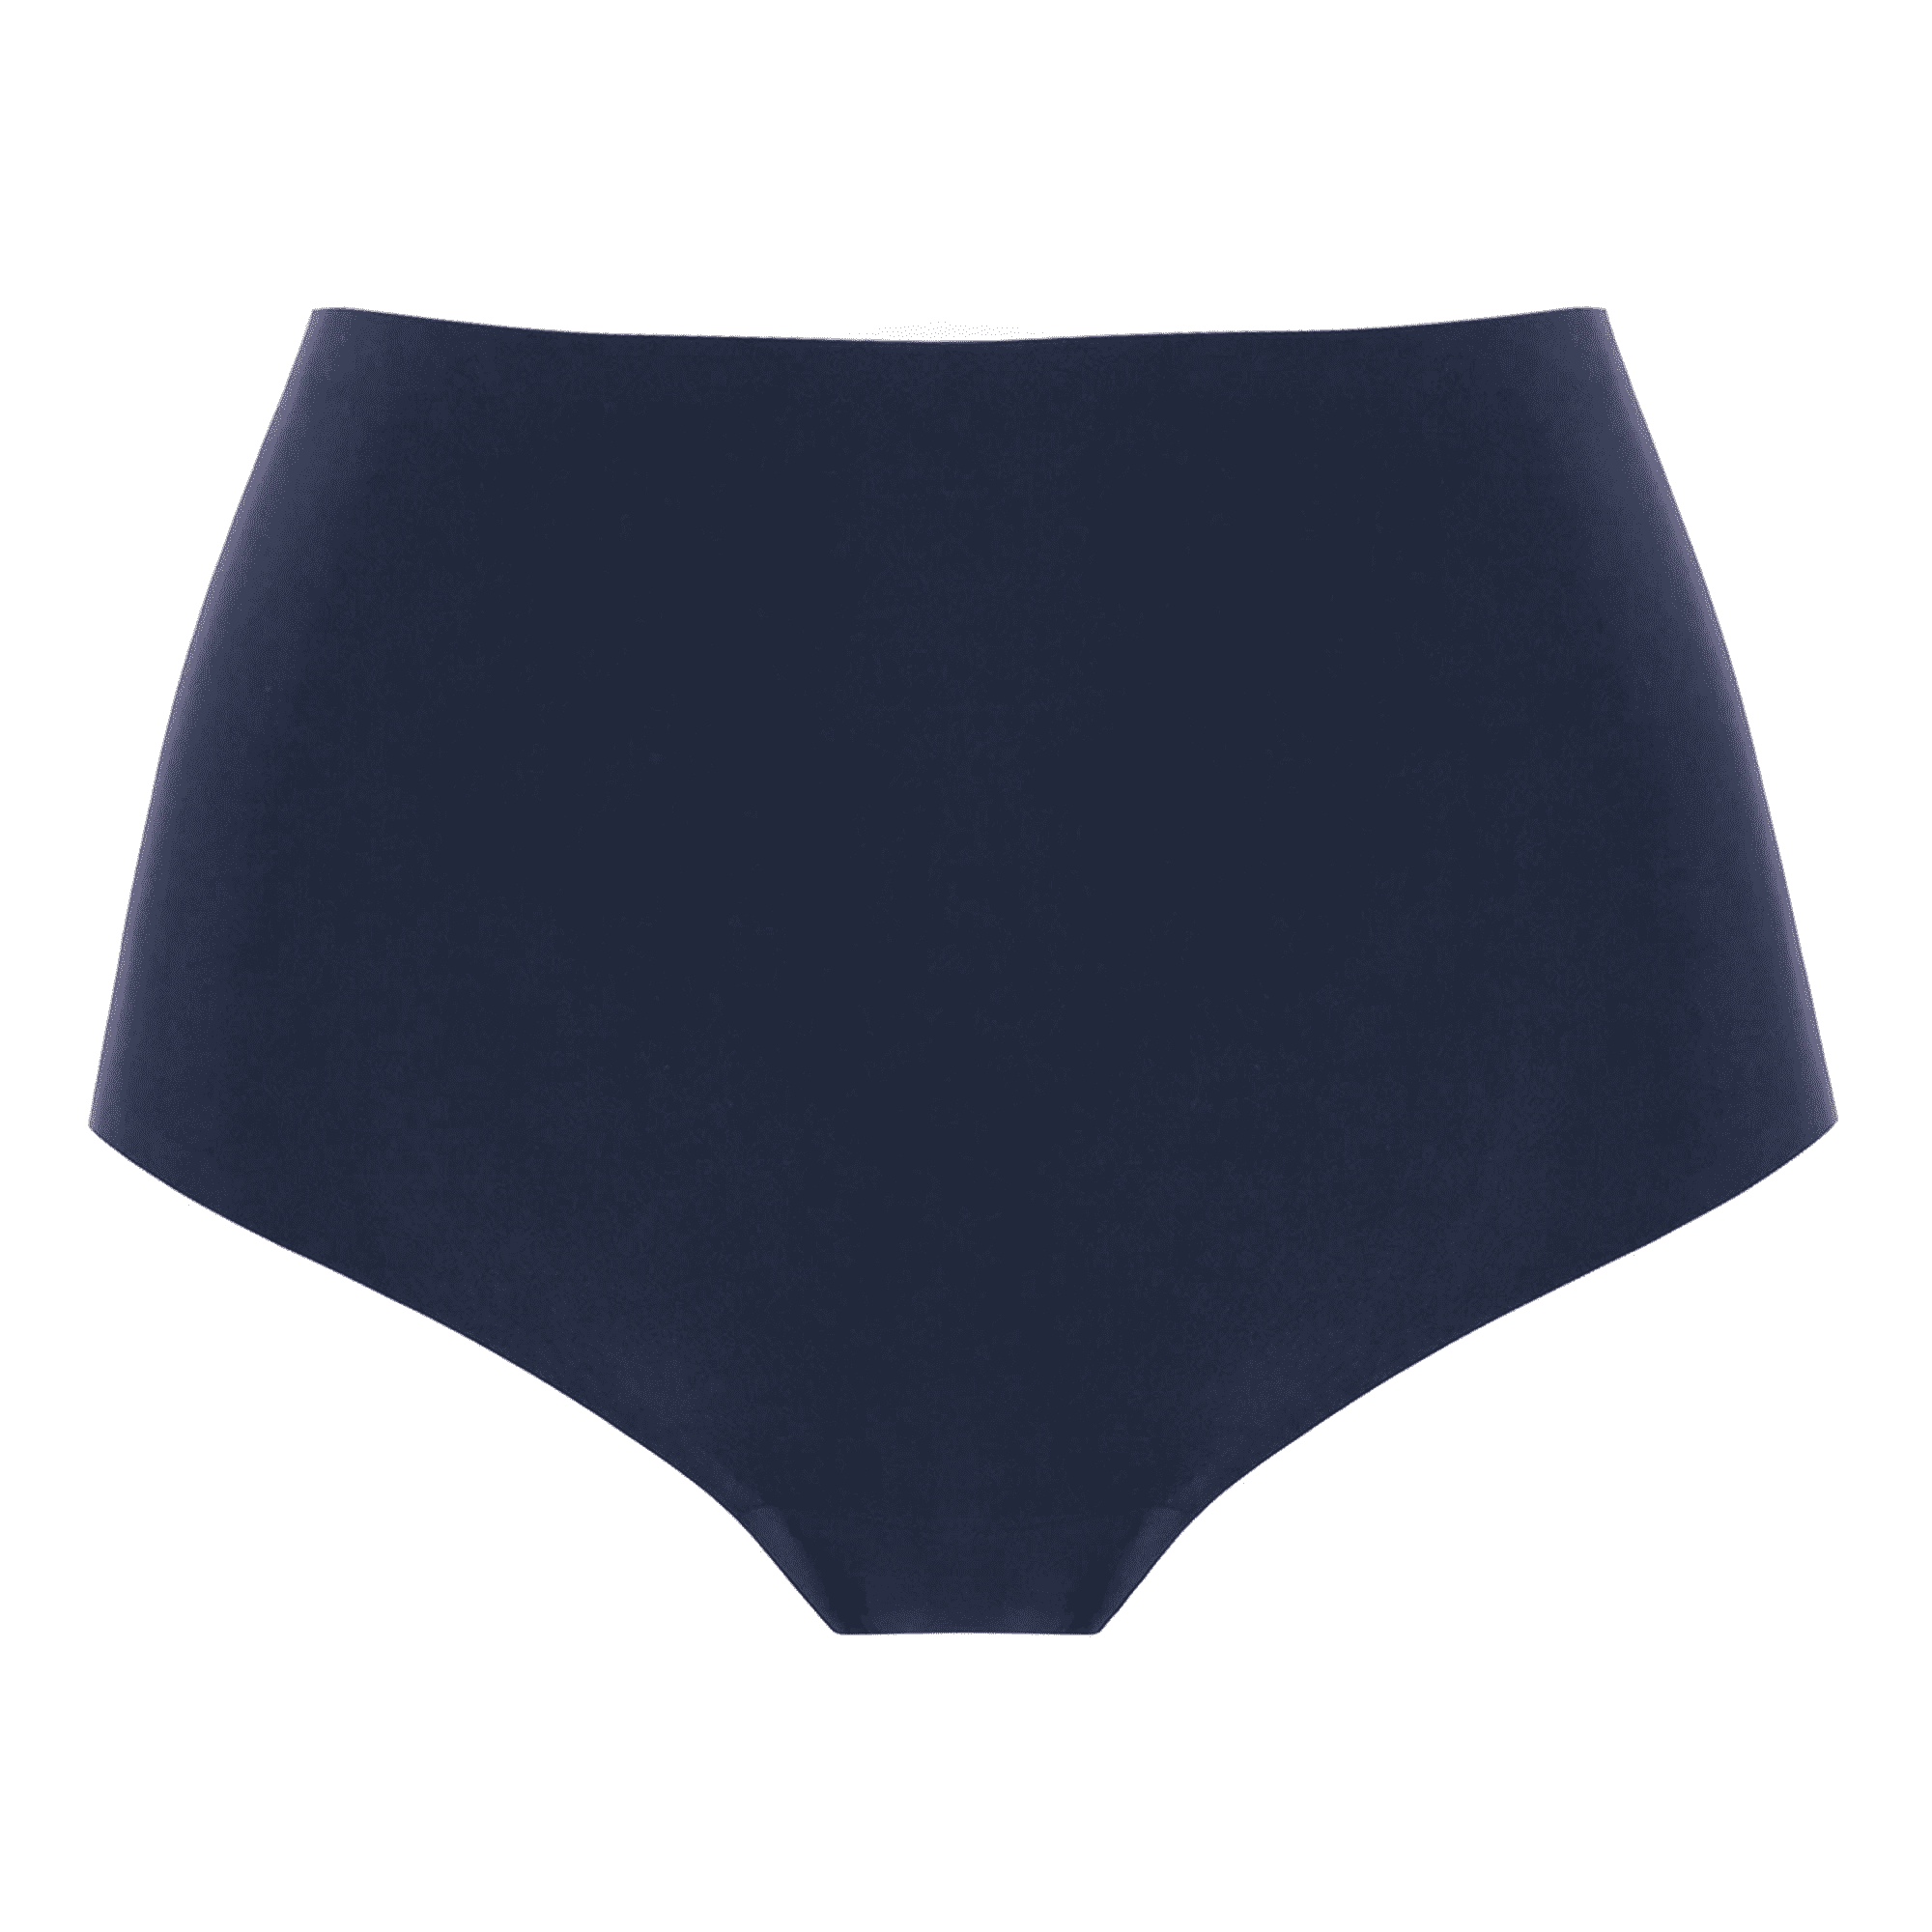 Smoothease Invisible Full Stretch Brief